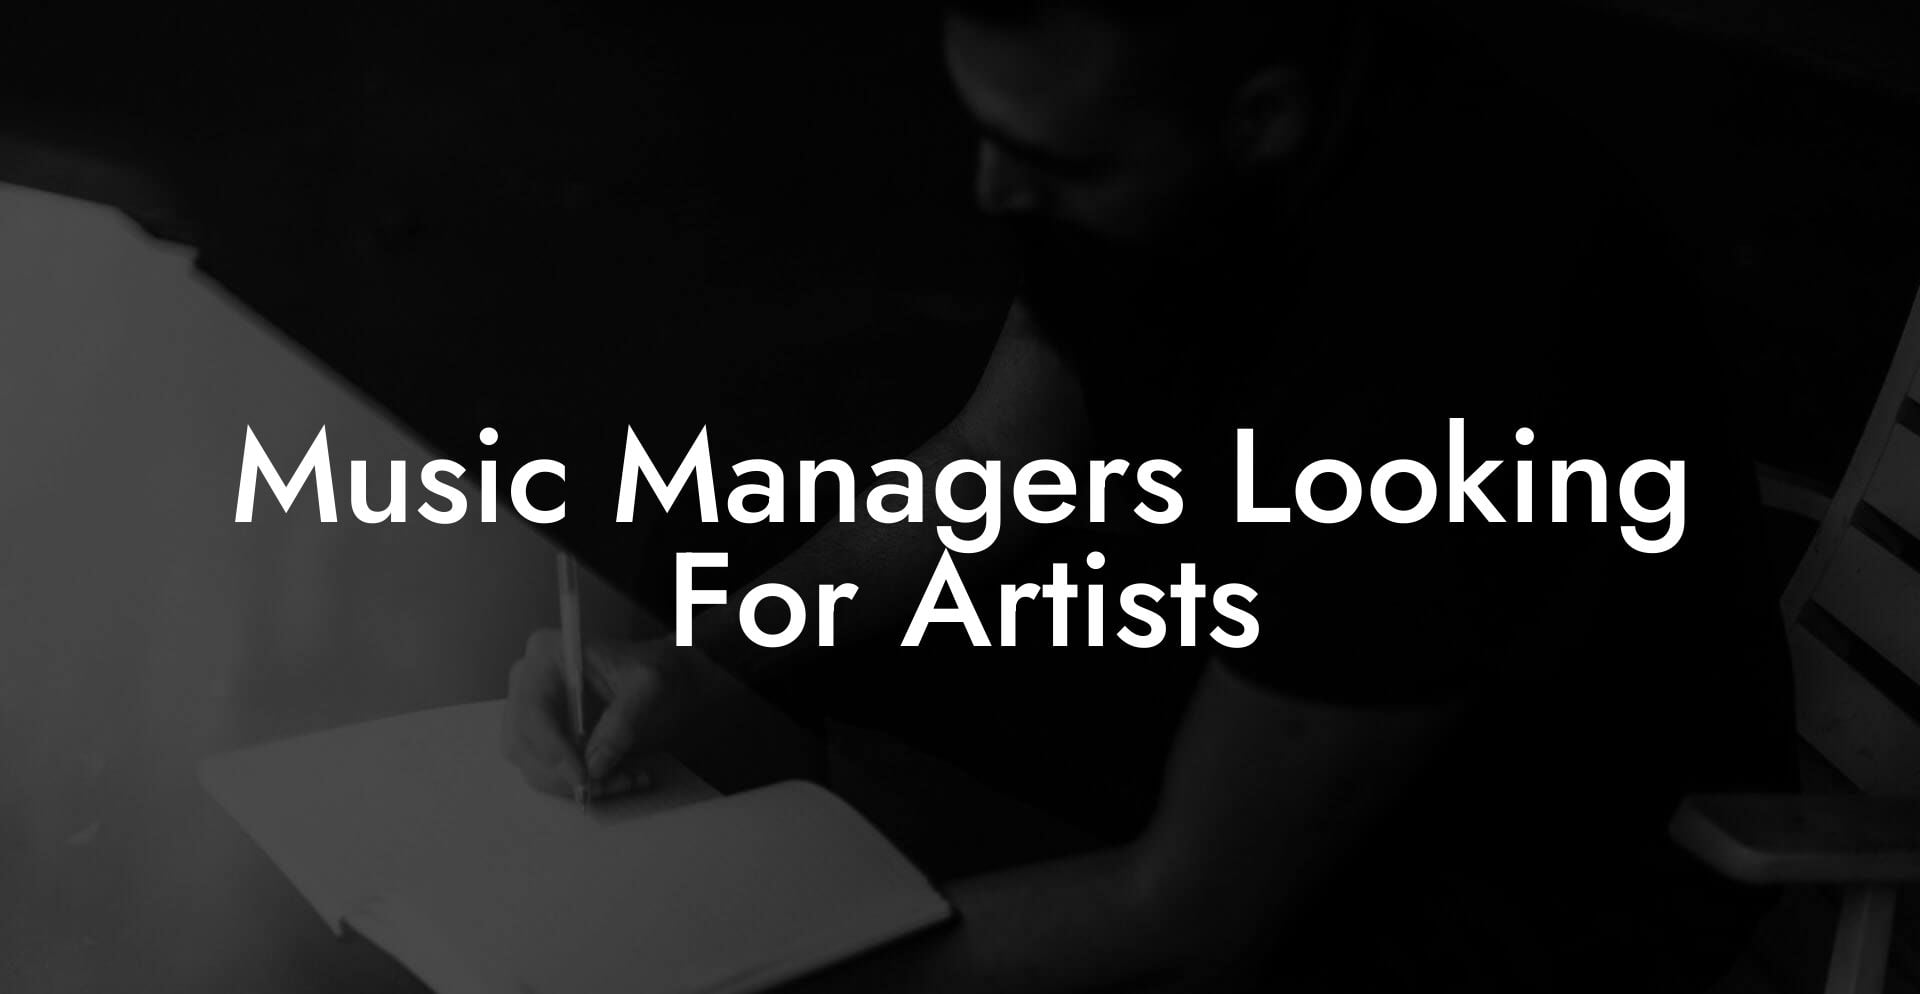 Music Managers Looking For Artists